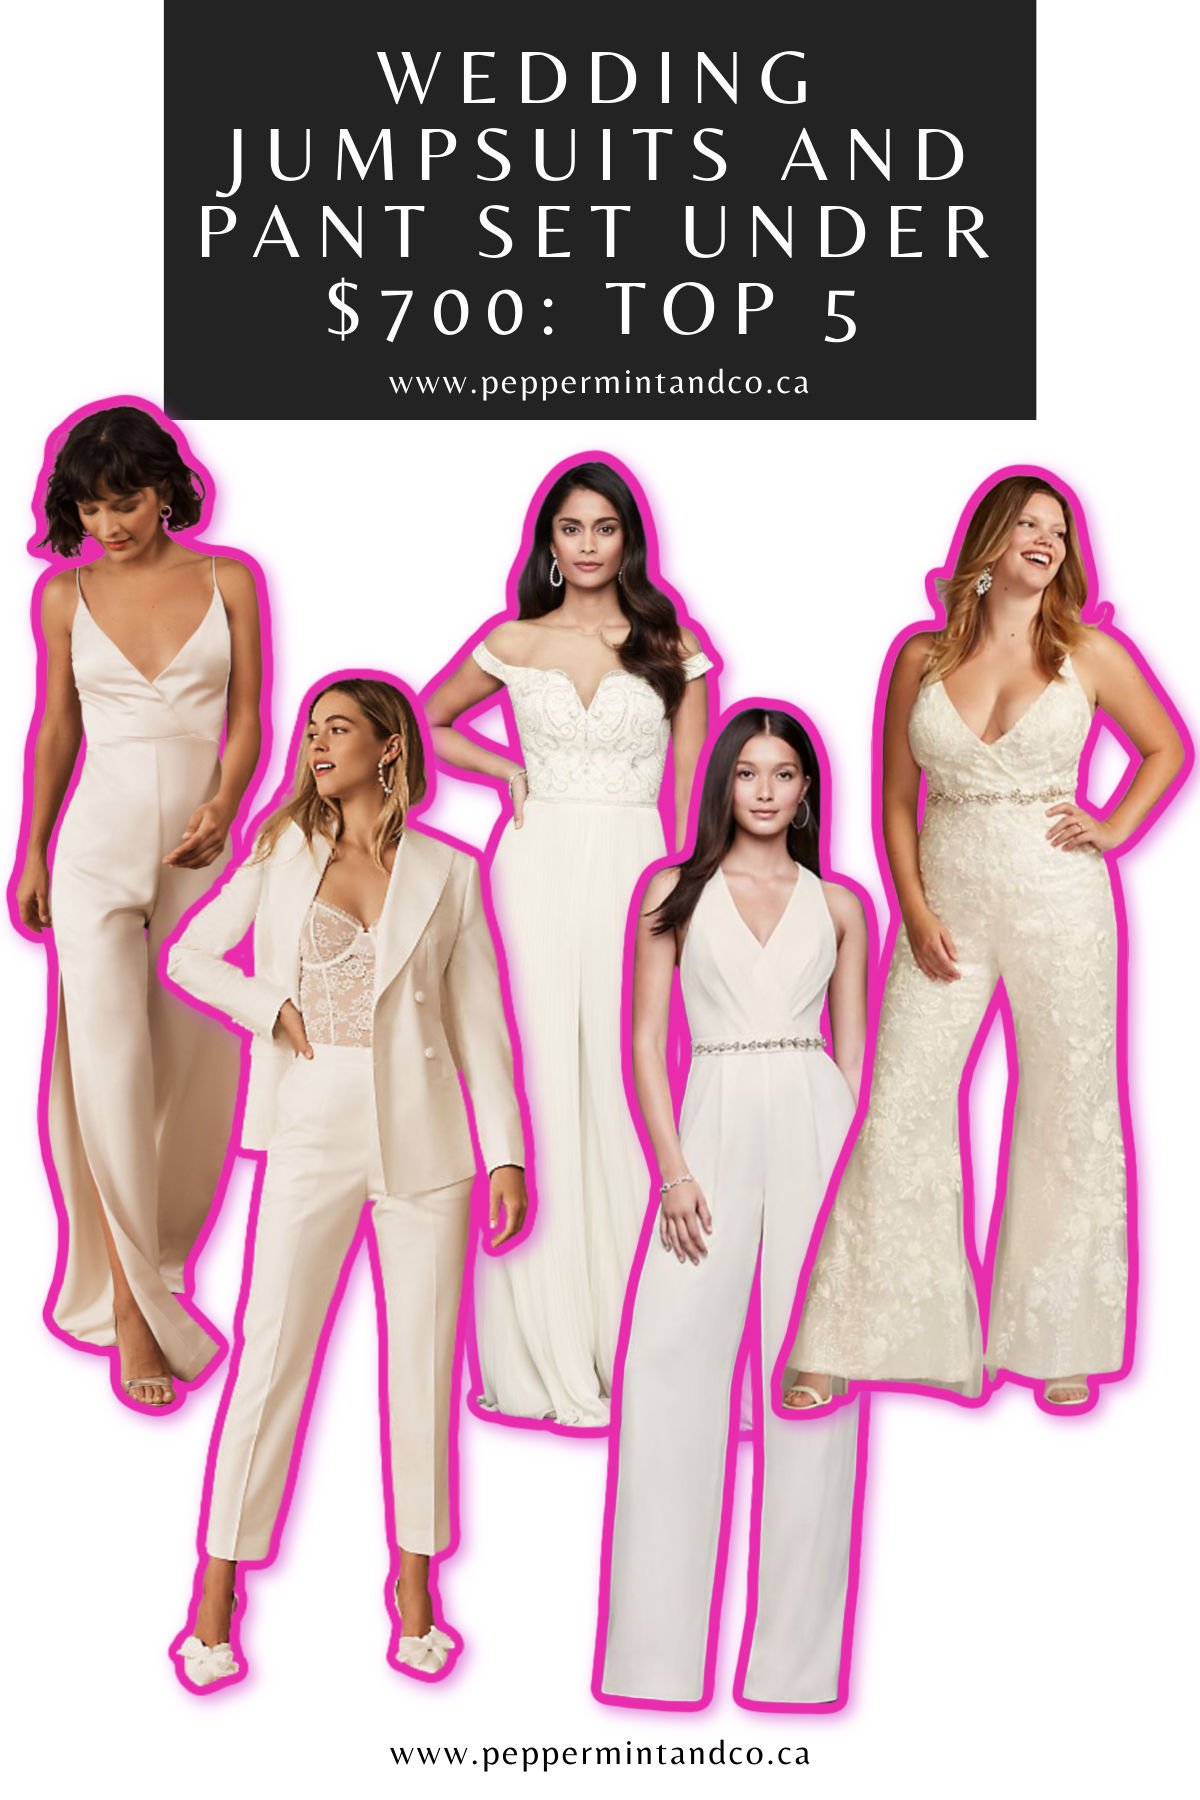 https://www.peppermintandco.ca/wp-content/uploads/2021/02/WEDDING-JUMPSUITS-AND-PANT-SET-UNDER-700_-TOP-5.jpg